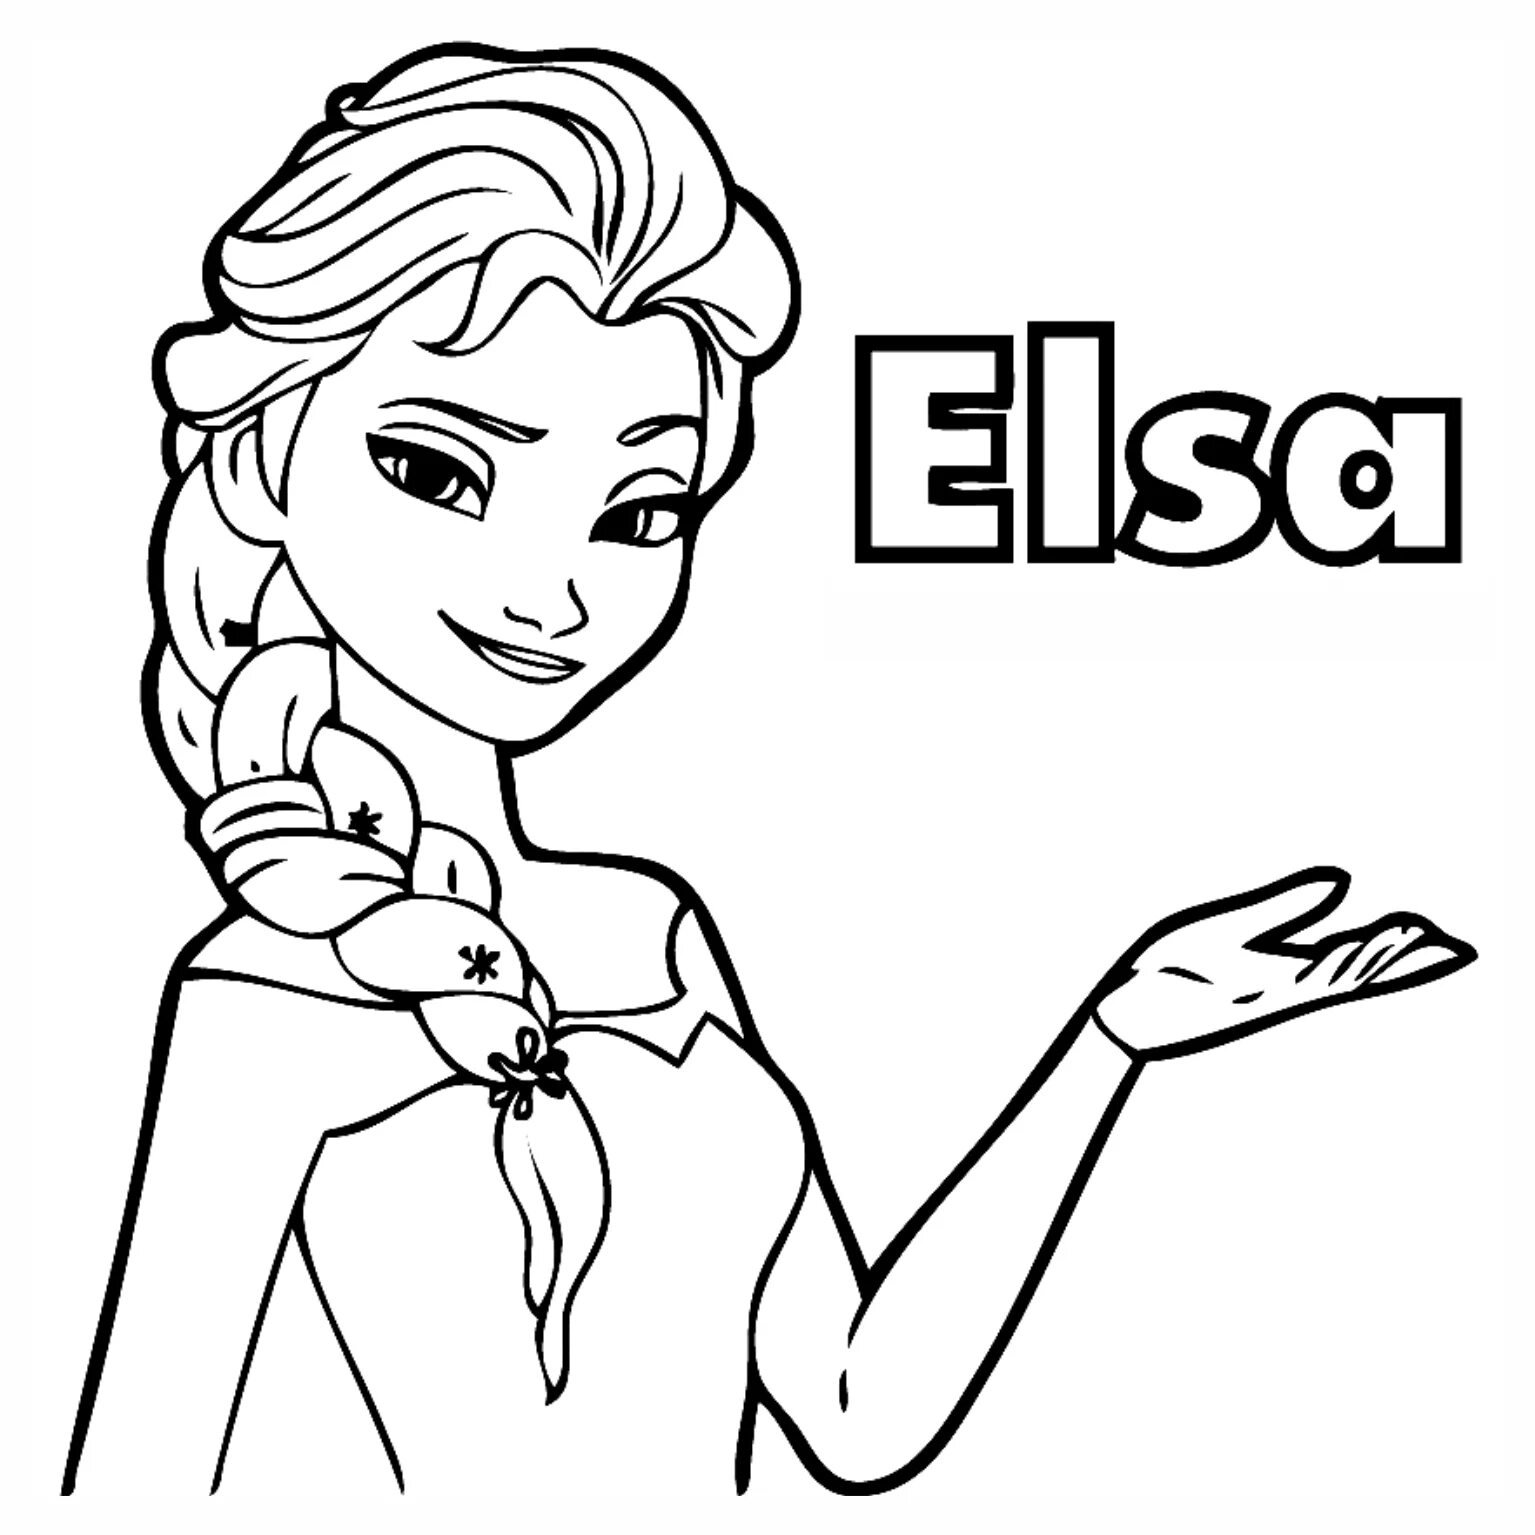 Elsa dreamy coloring game for girls